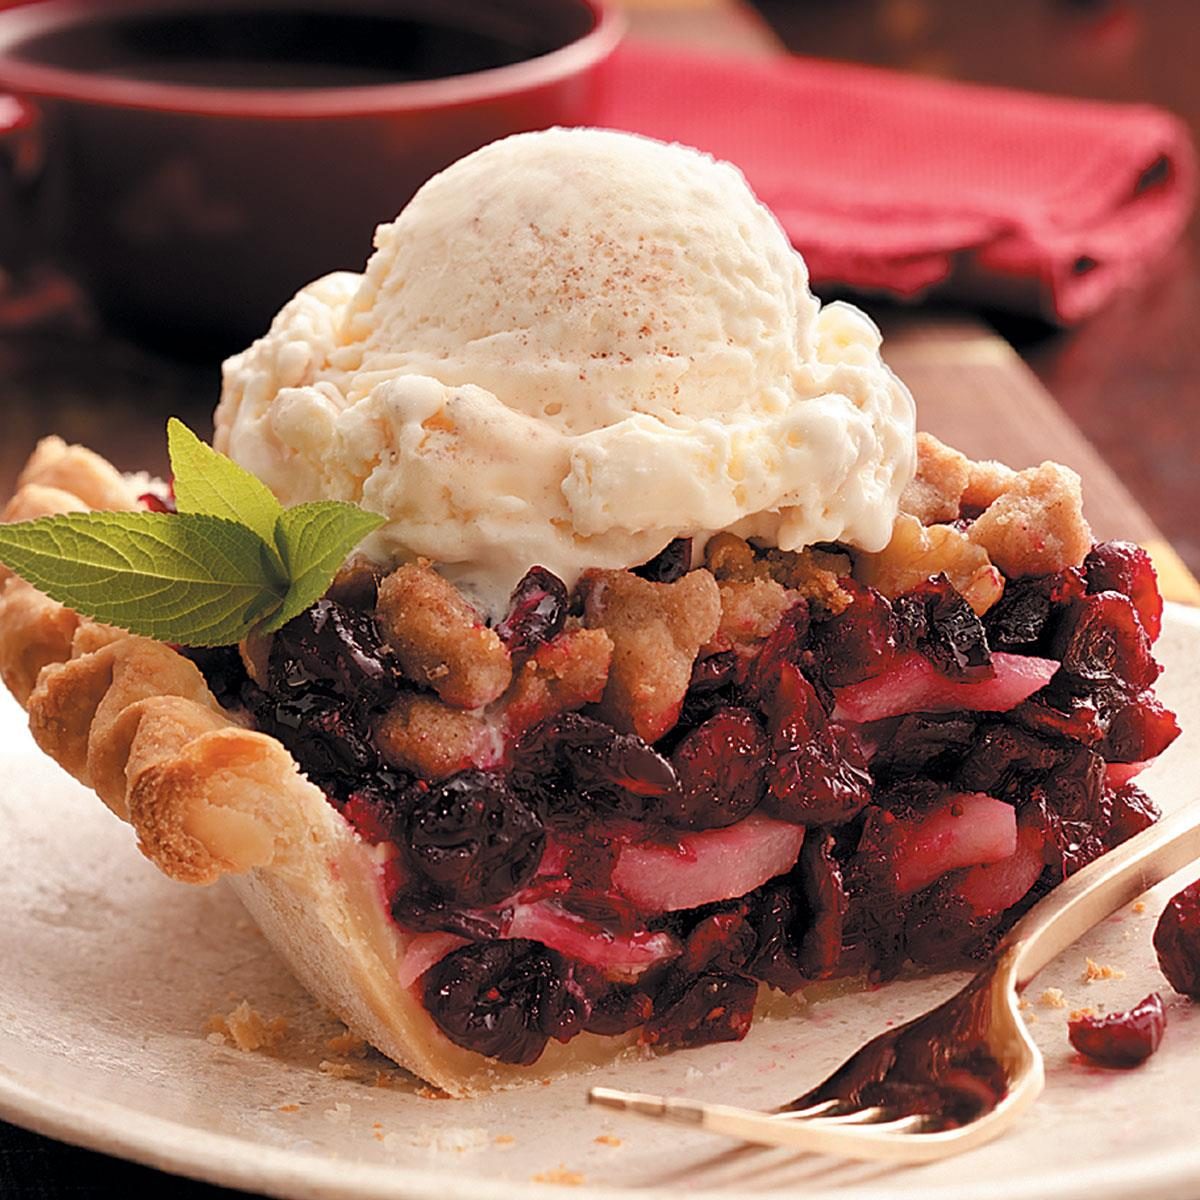 Cranberry Pear Pie Recipe: How to Make It